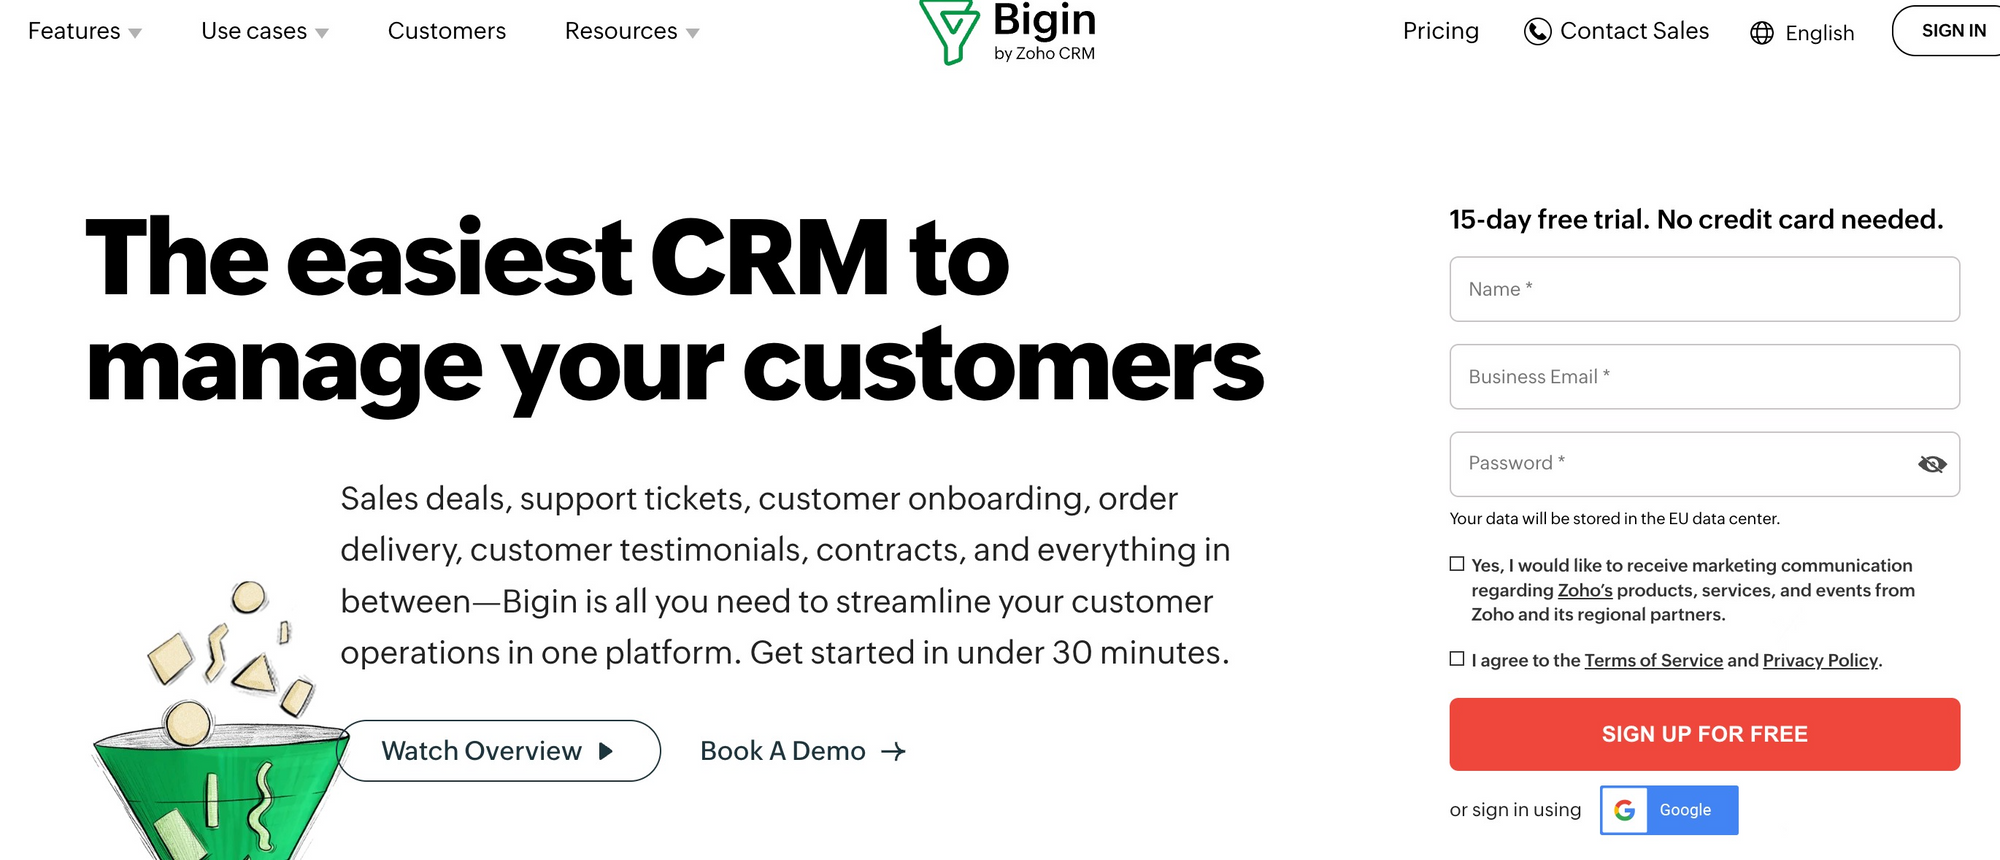 Bigin by Zoho, a small business CRM